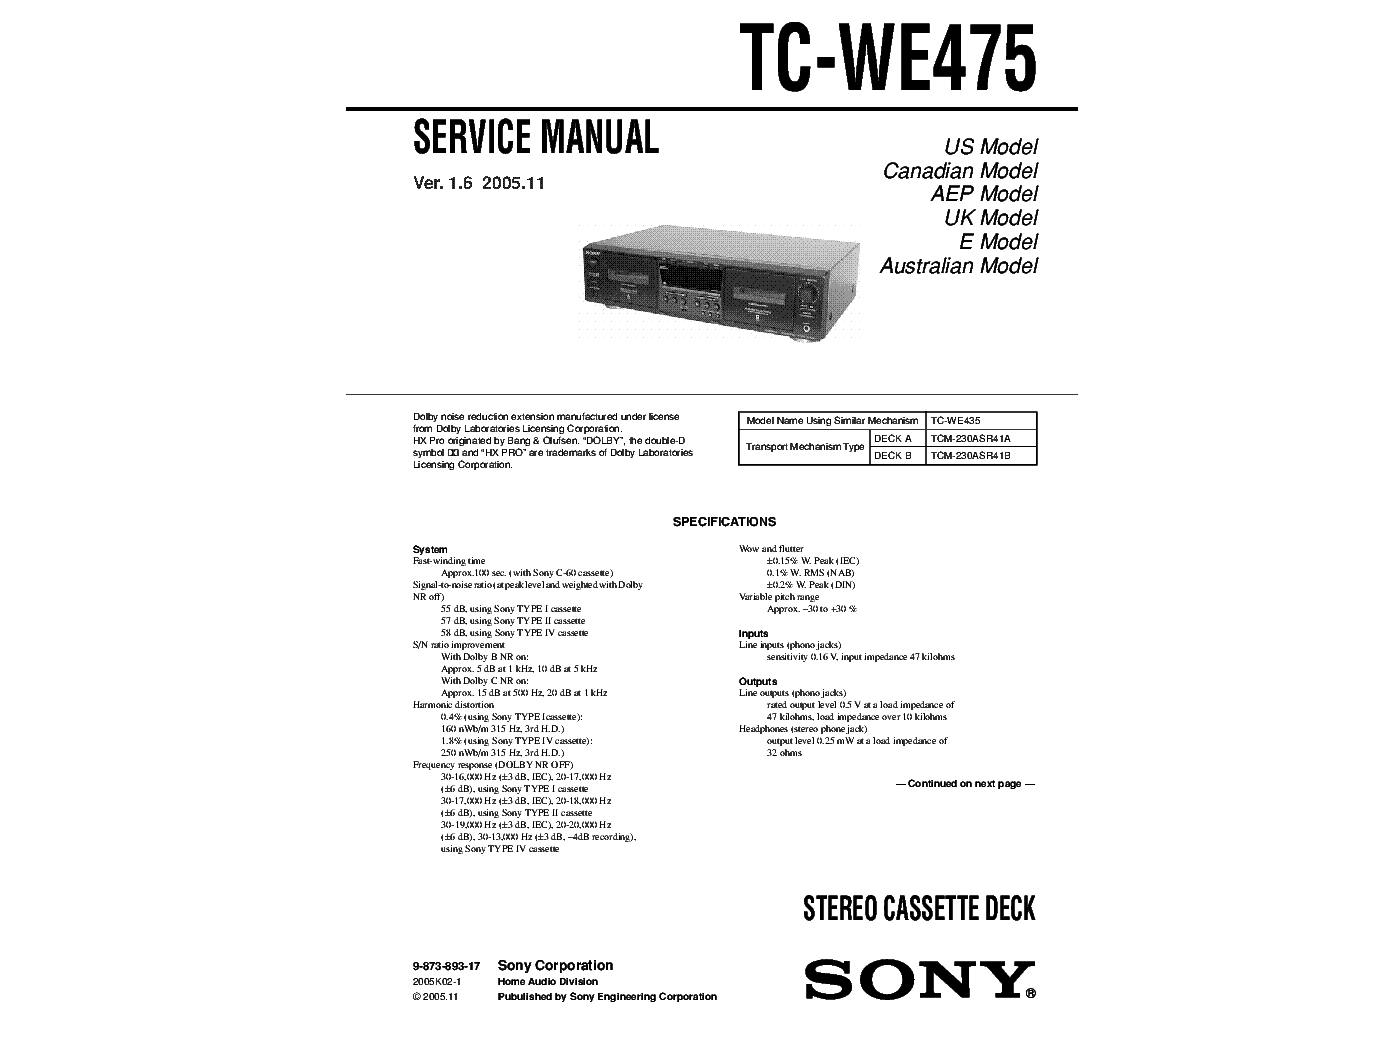 SONY TC-WE475 VER.1.6 service manual (1st page)